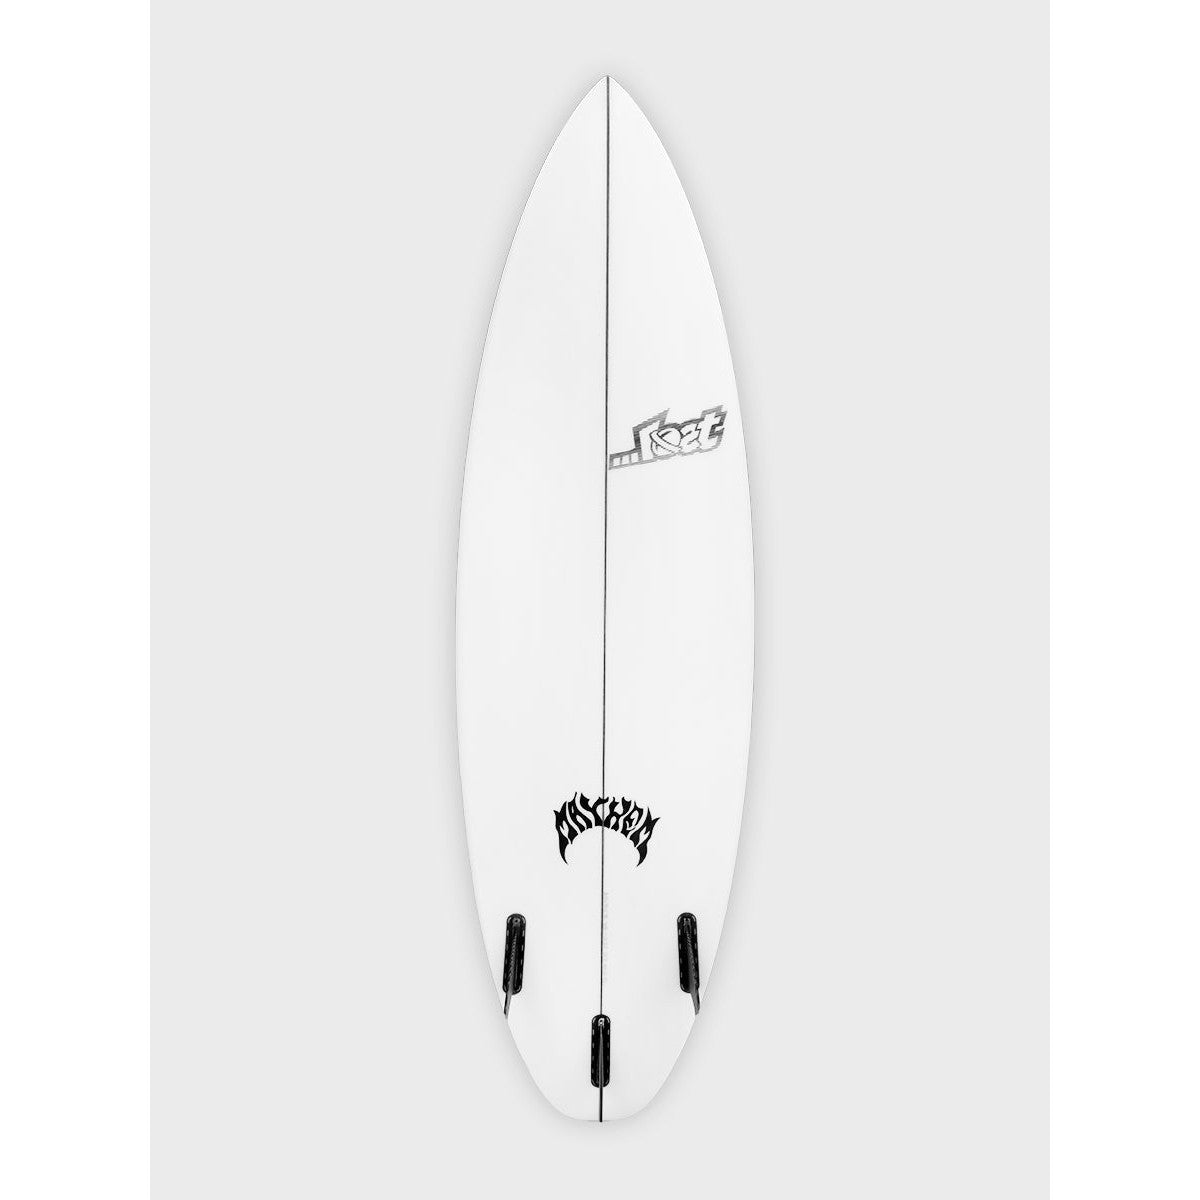 Lost Surfboards Driver 3.0 Squash Tail PRO Dims Preorder – Black